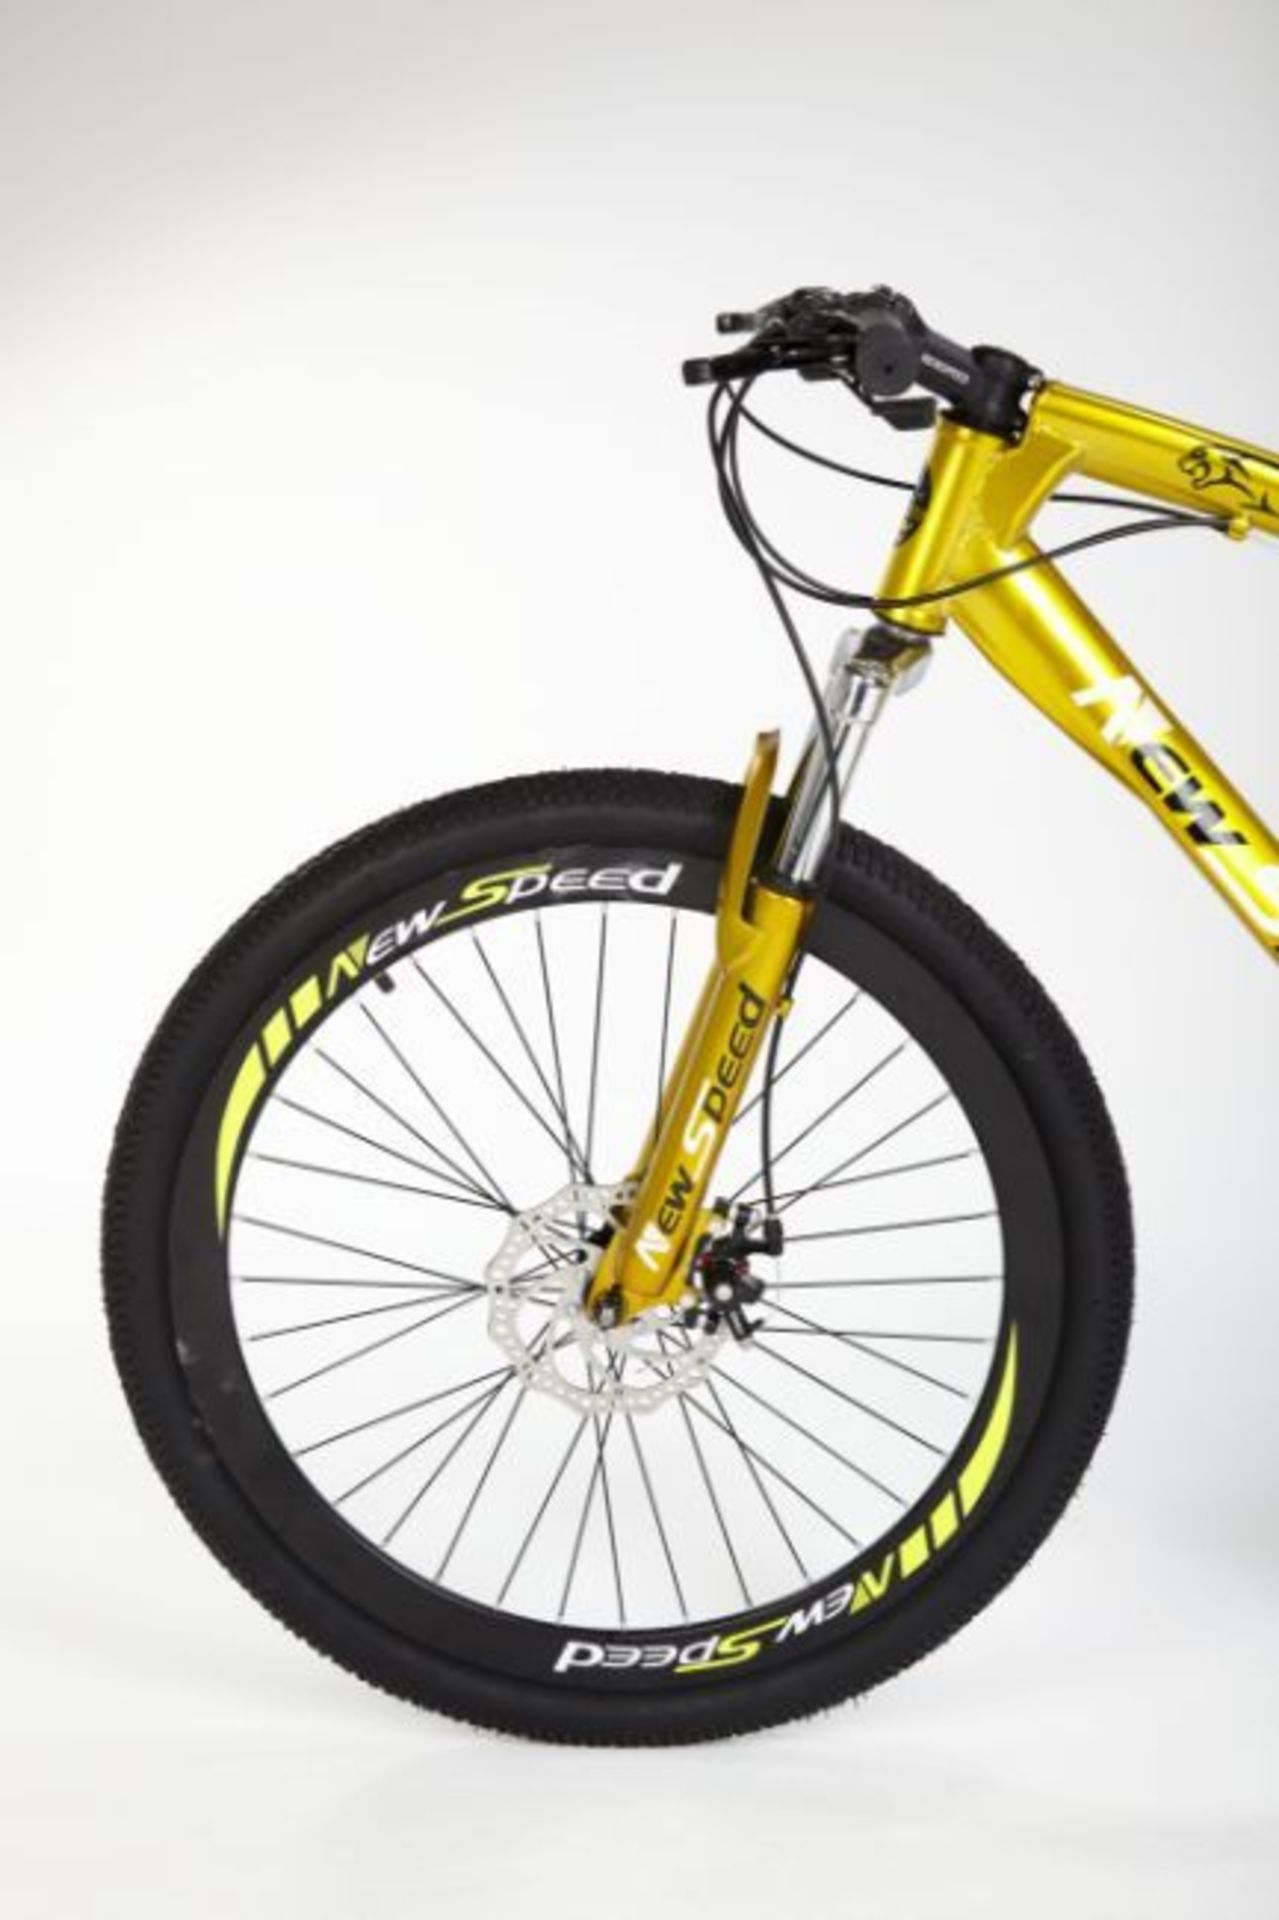 JOB LOT 5 X BRAND NEW NEW SPEED 21 GEARS STUNNING SUSPENSION GOLD COLOURED MOUNTAIN BIKE - Image 5 of 11